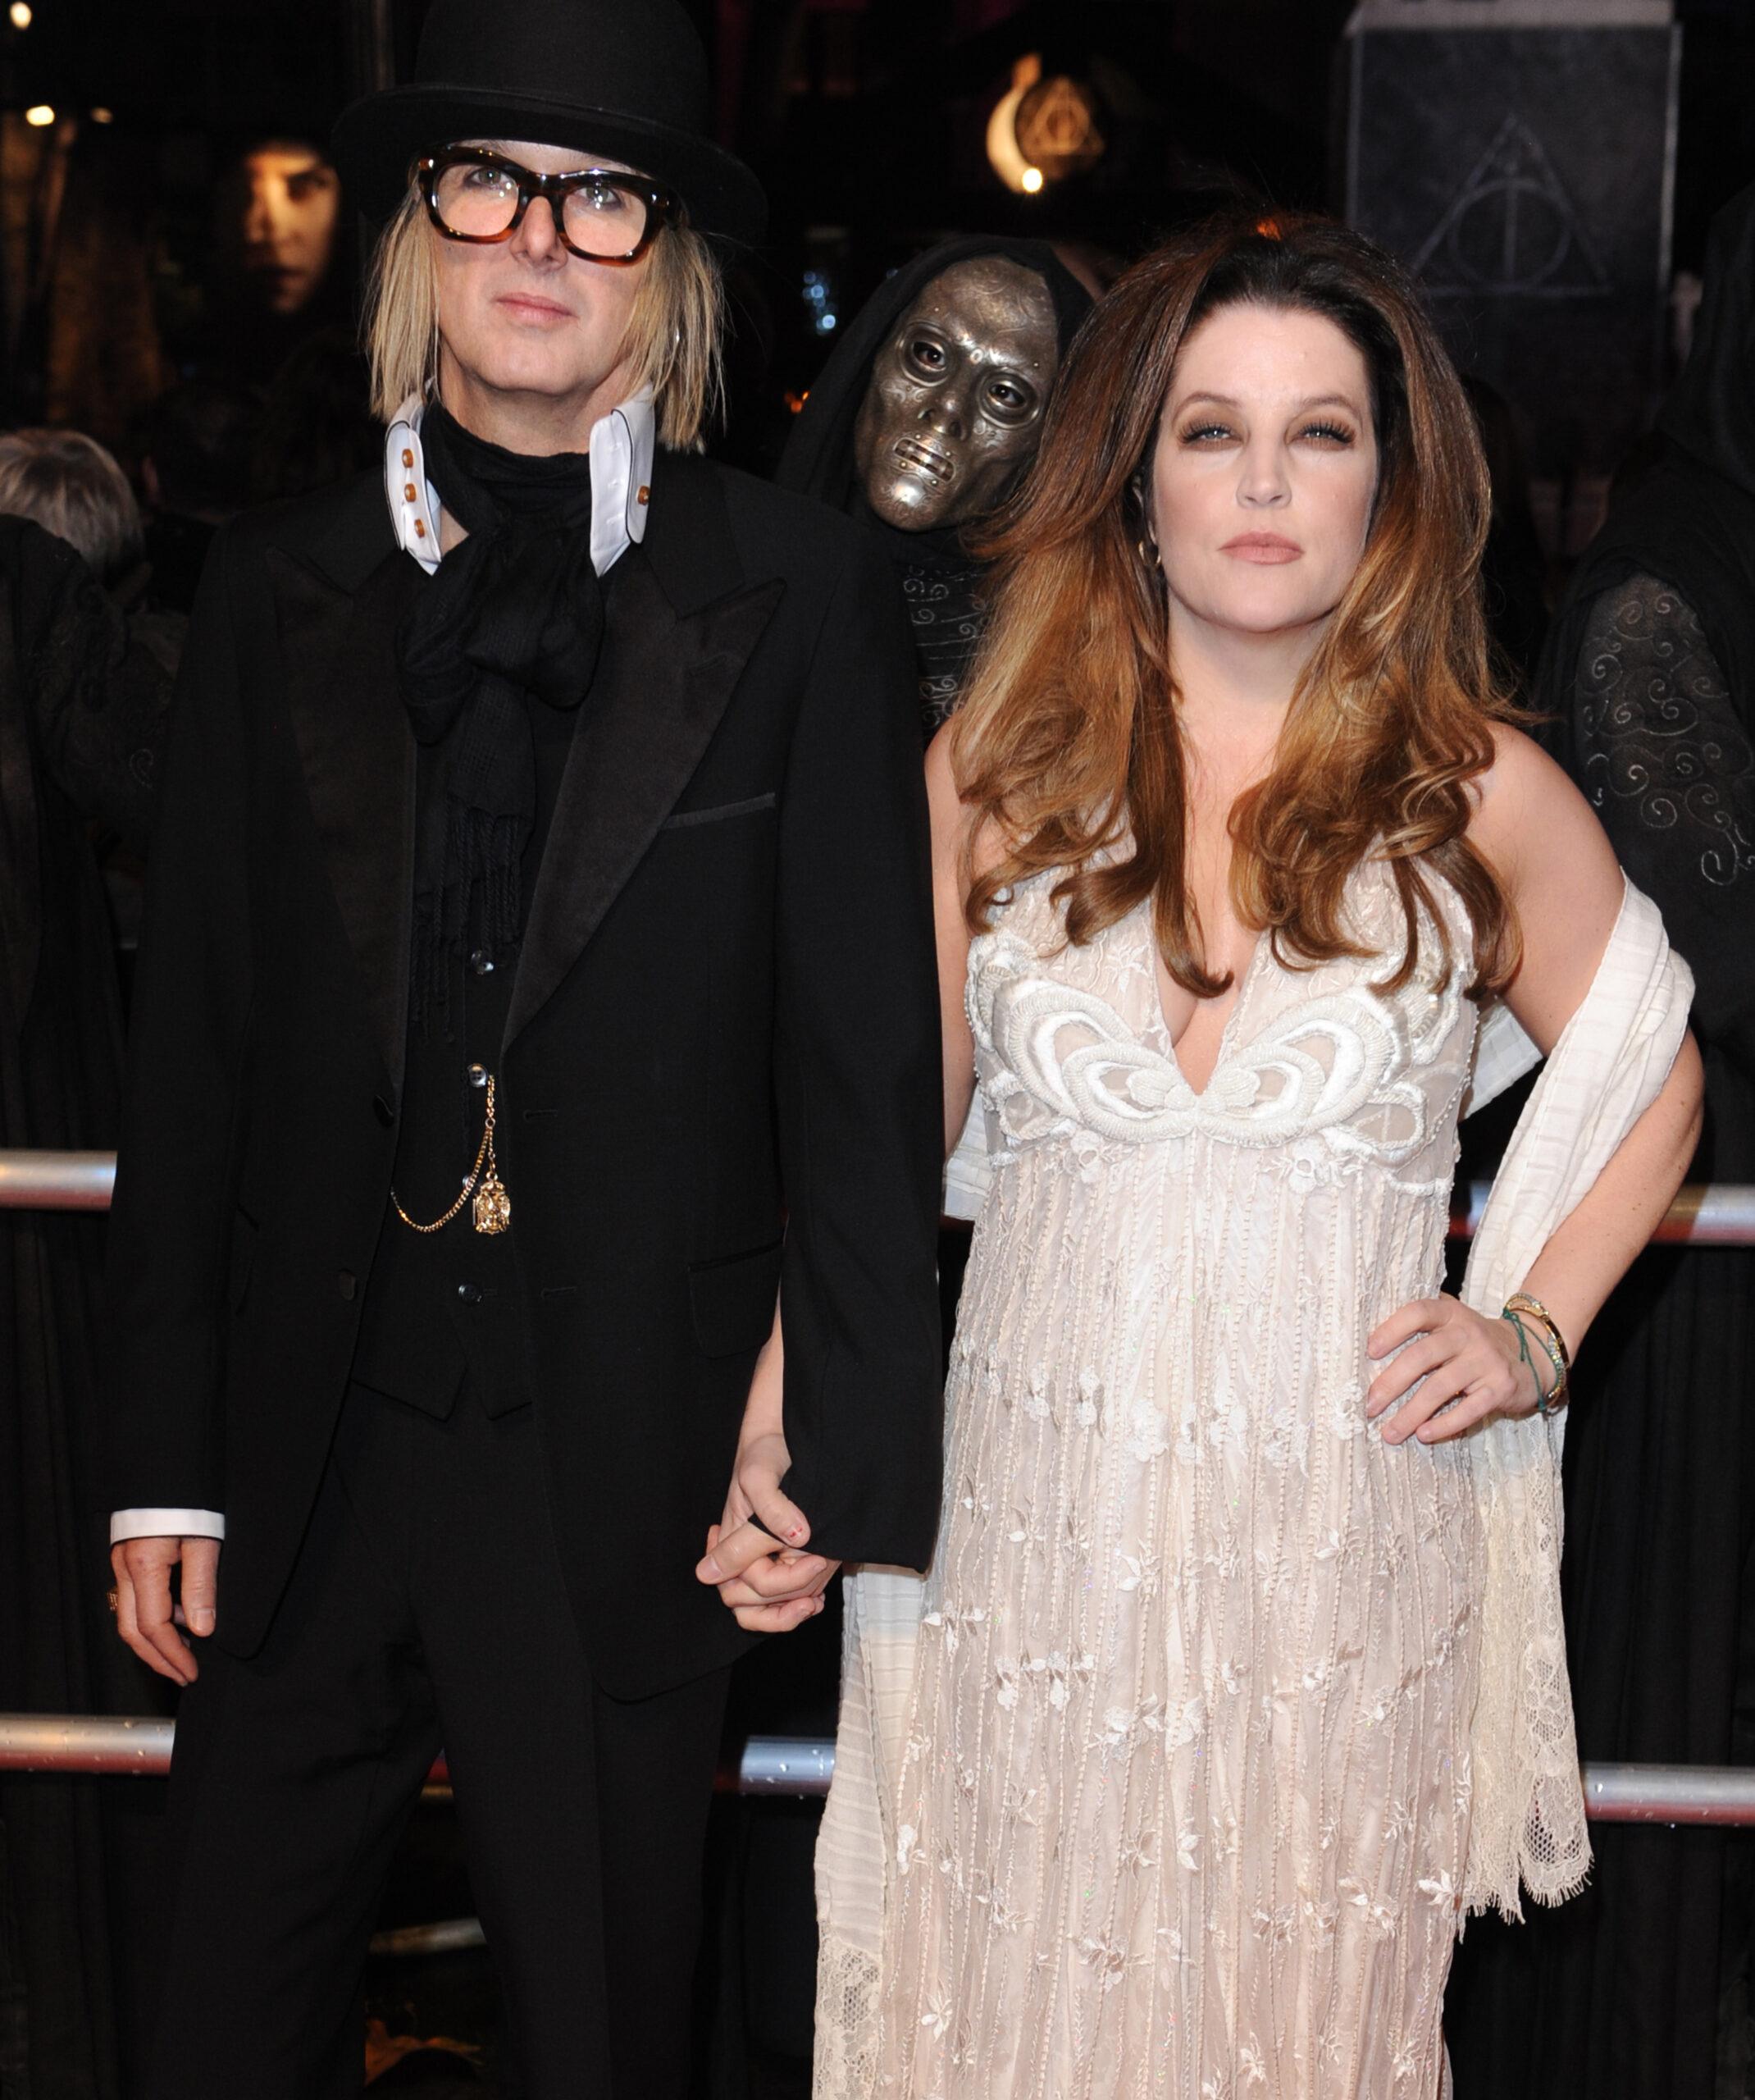 Lisa Marie Presley's Ex-Husand Request Child Support In Ongoing Divorce